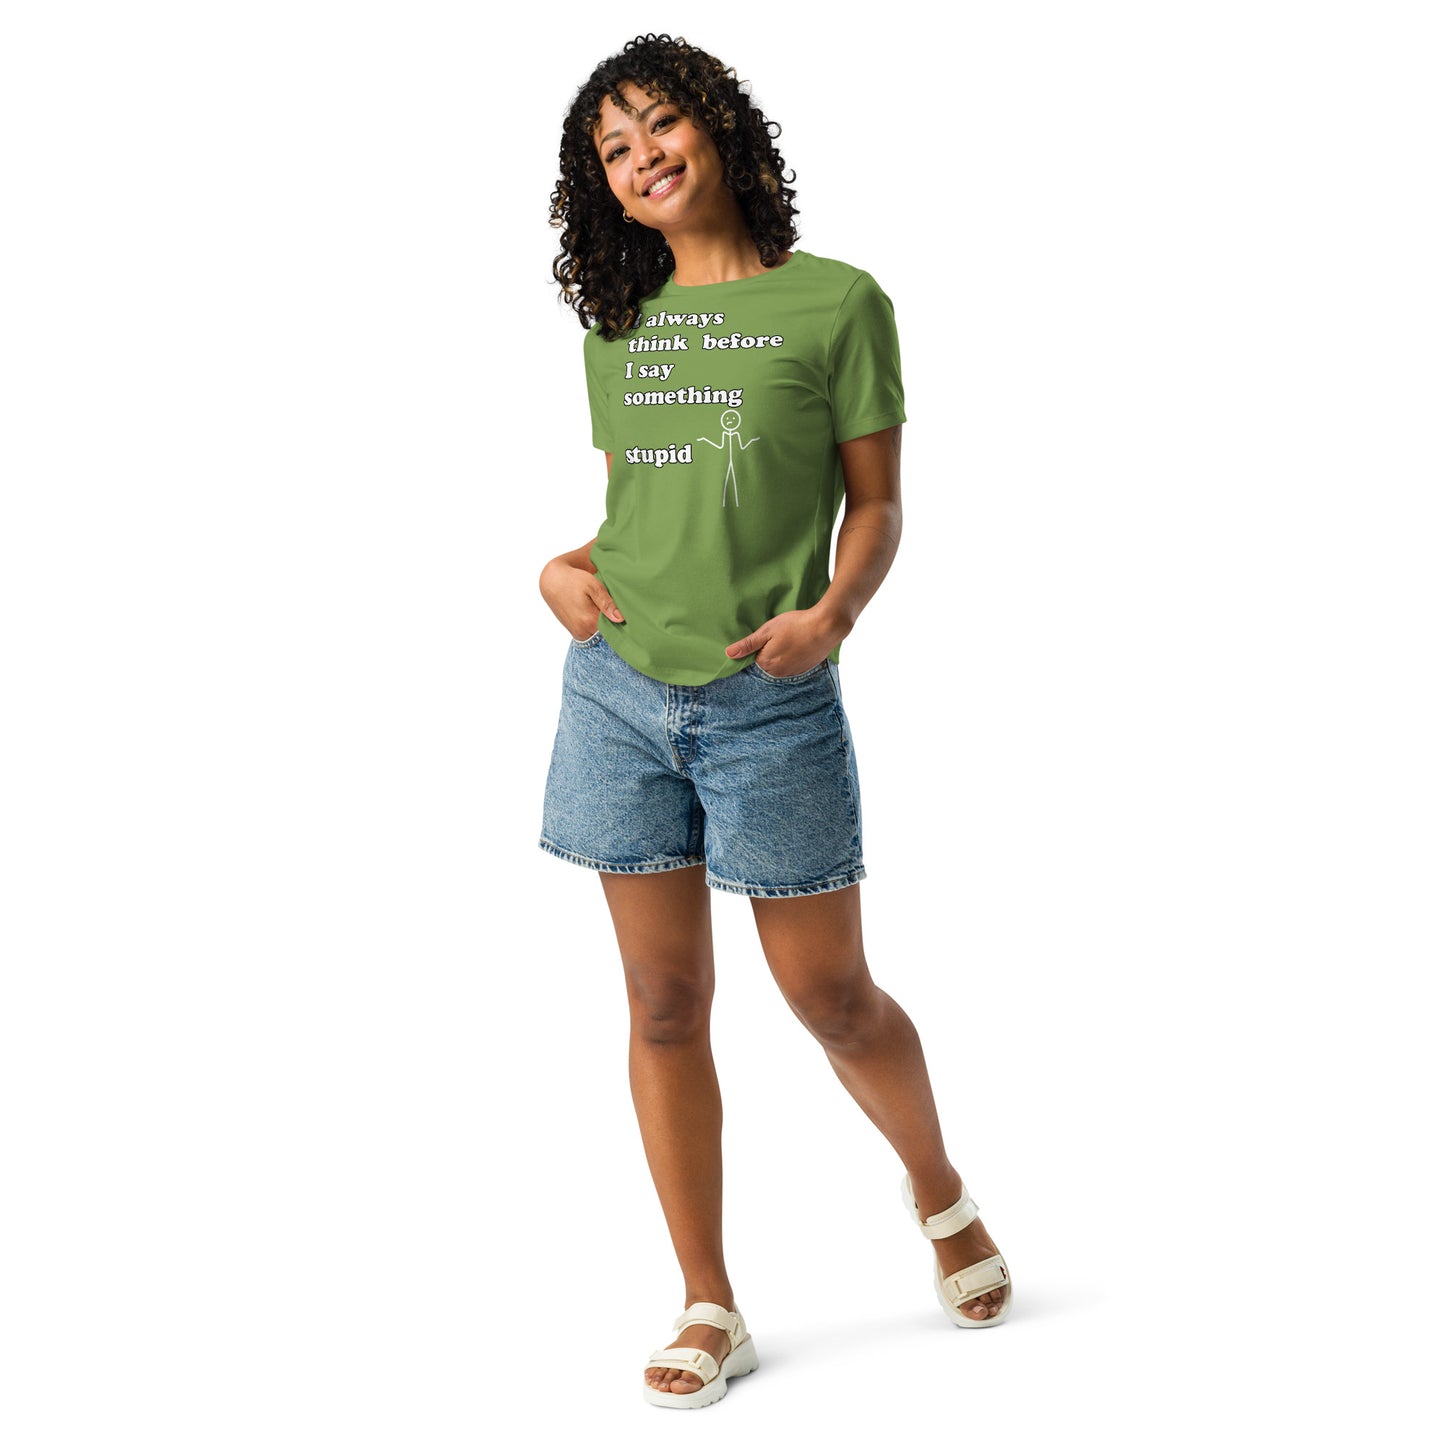 Woman with leaf green t-shirt with text "I always think before I say something stupid"